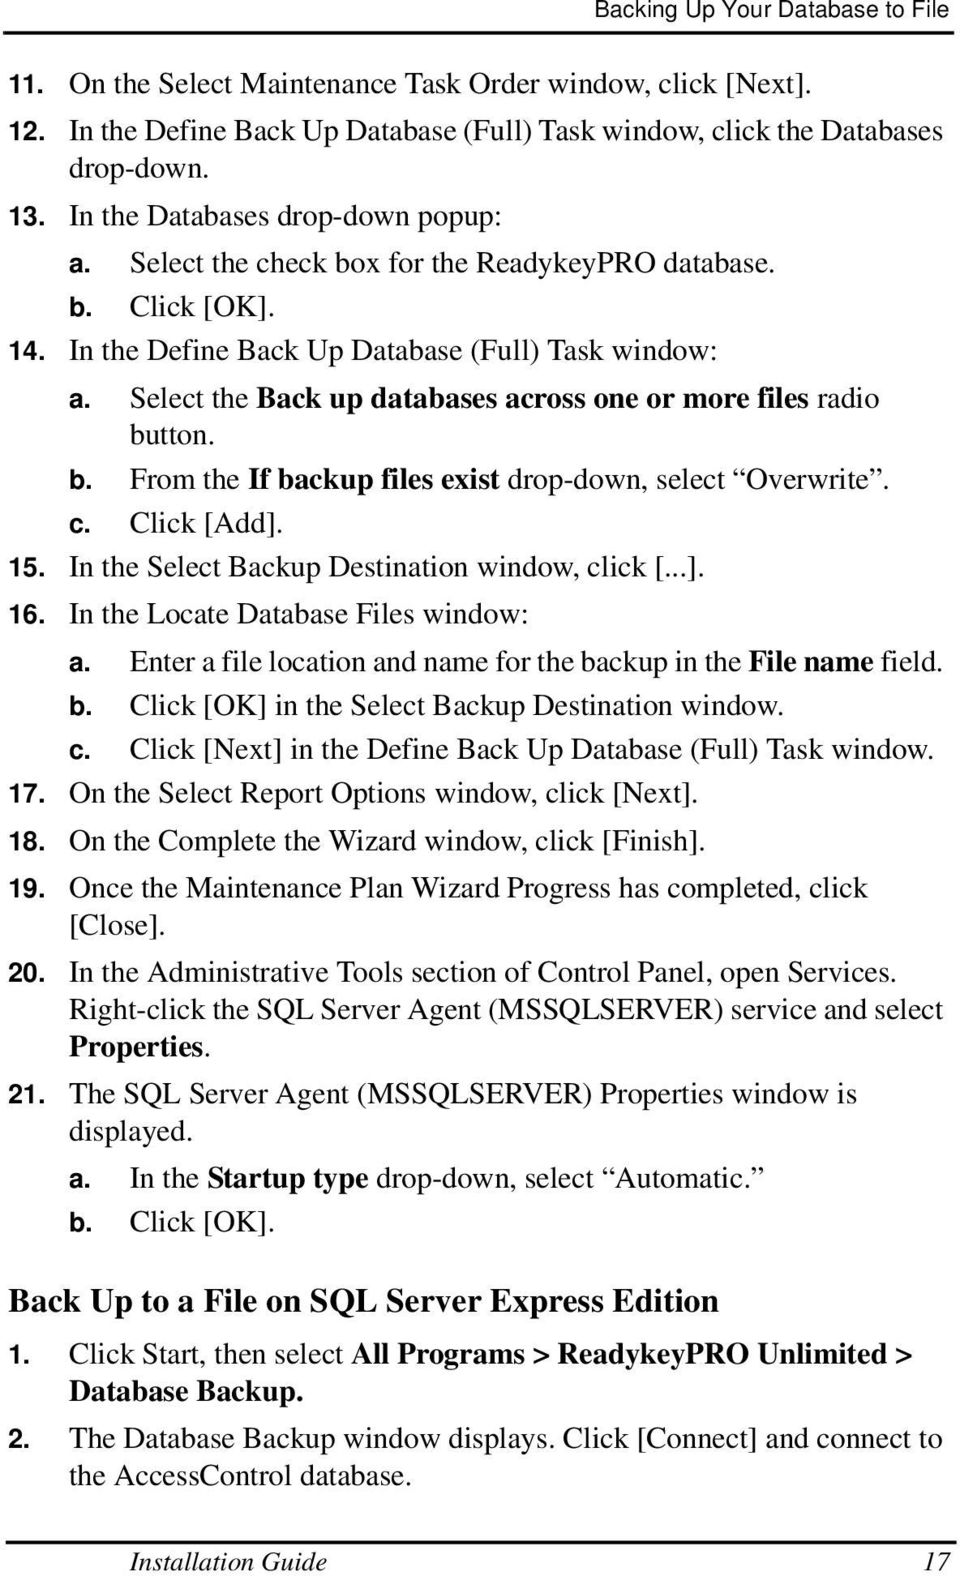 Select the Back up databases across one or more files radio button. b. From the If backup files exist drop-down, select Overwrite. c. Click [Add]. 15. In the Select Backup Destination window, click [.